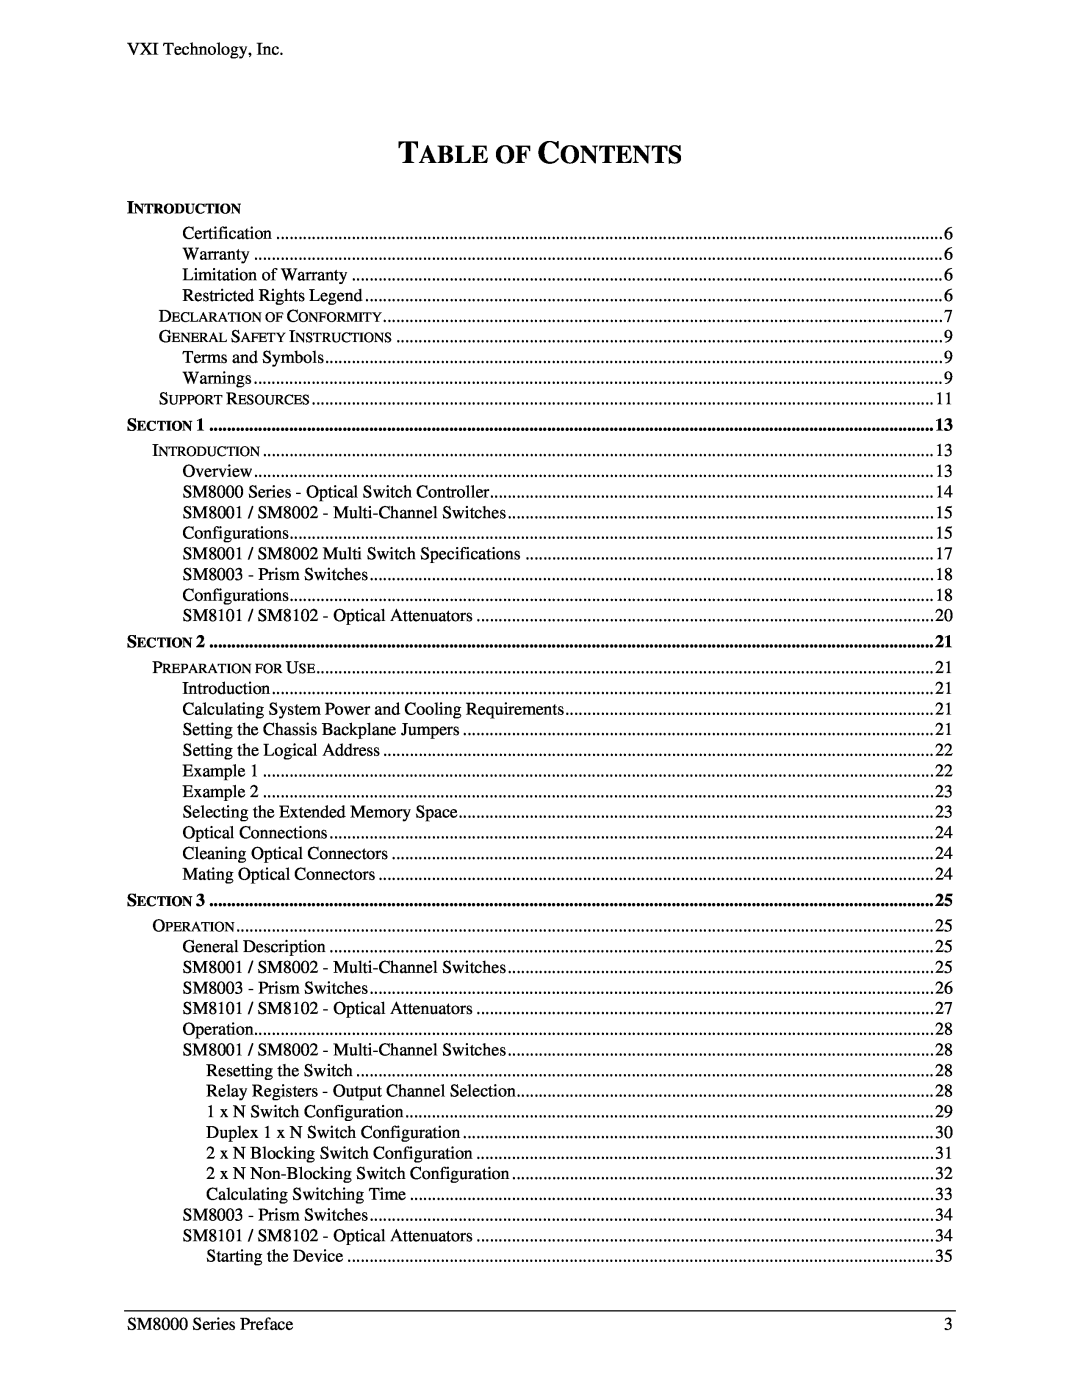 VXI SM8000 user manual Table Of Contents, Section, Introduction 